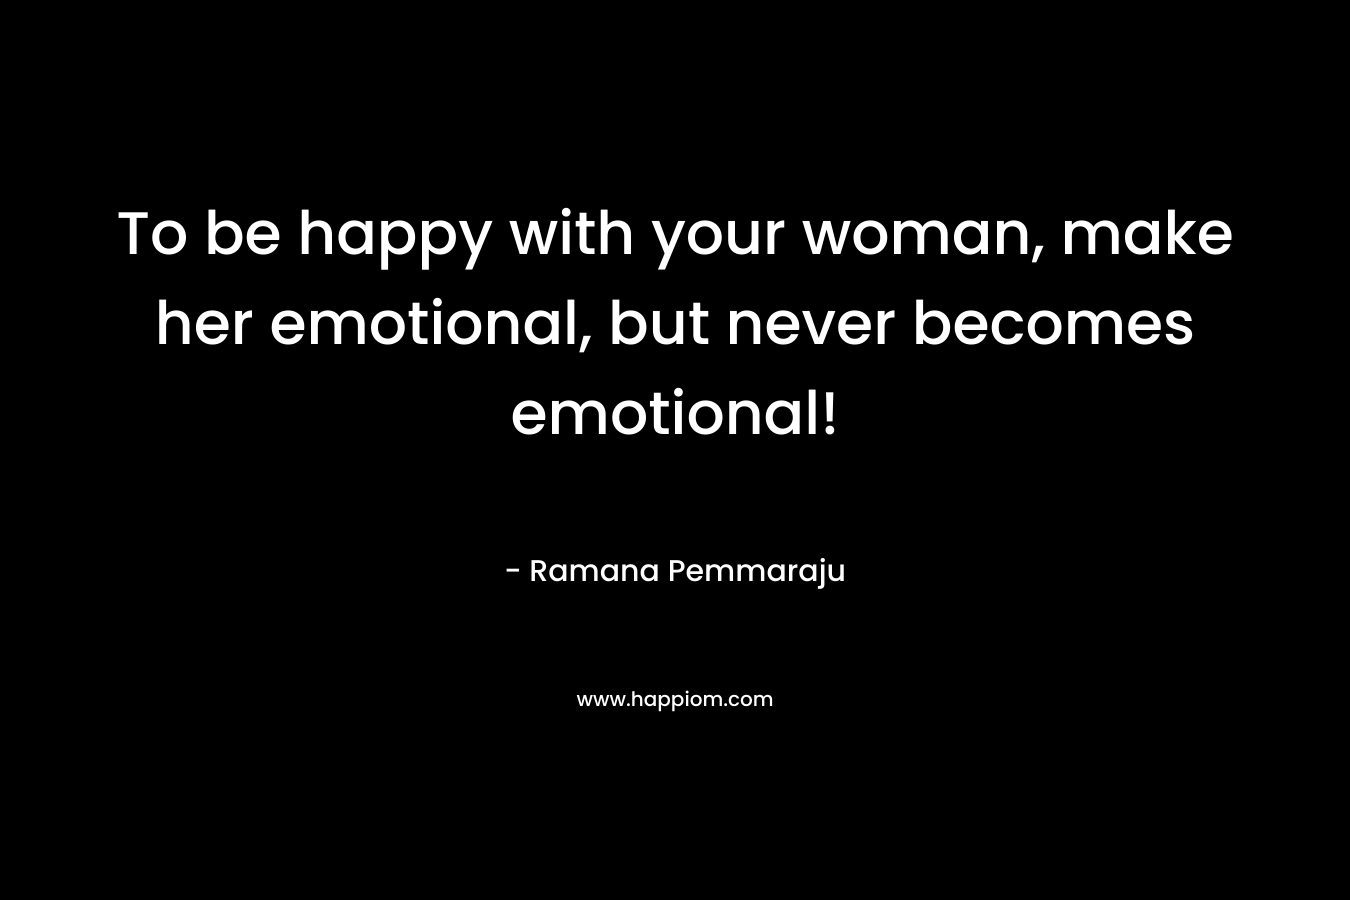 To be happy with your woman, make her emotional, but never becomes emotional!